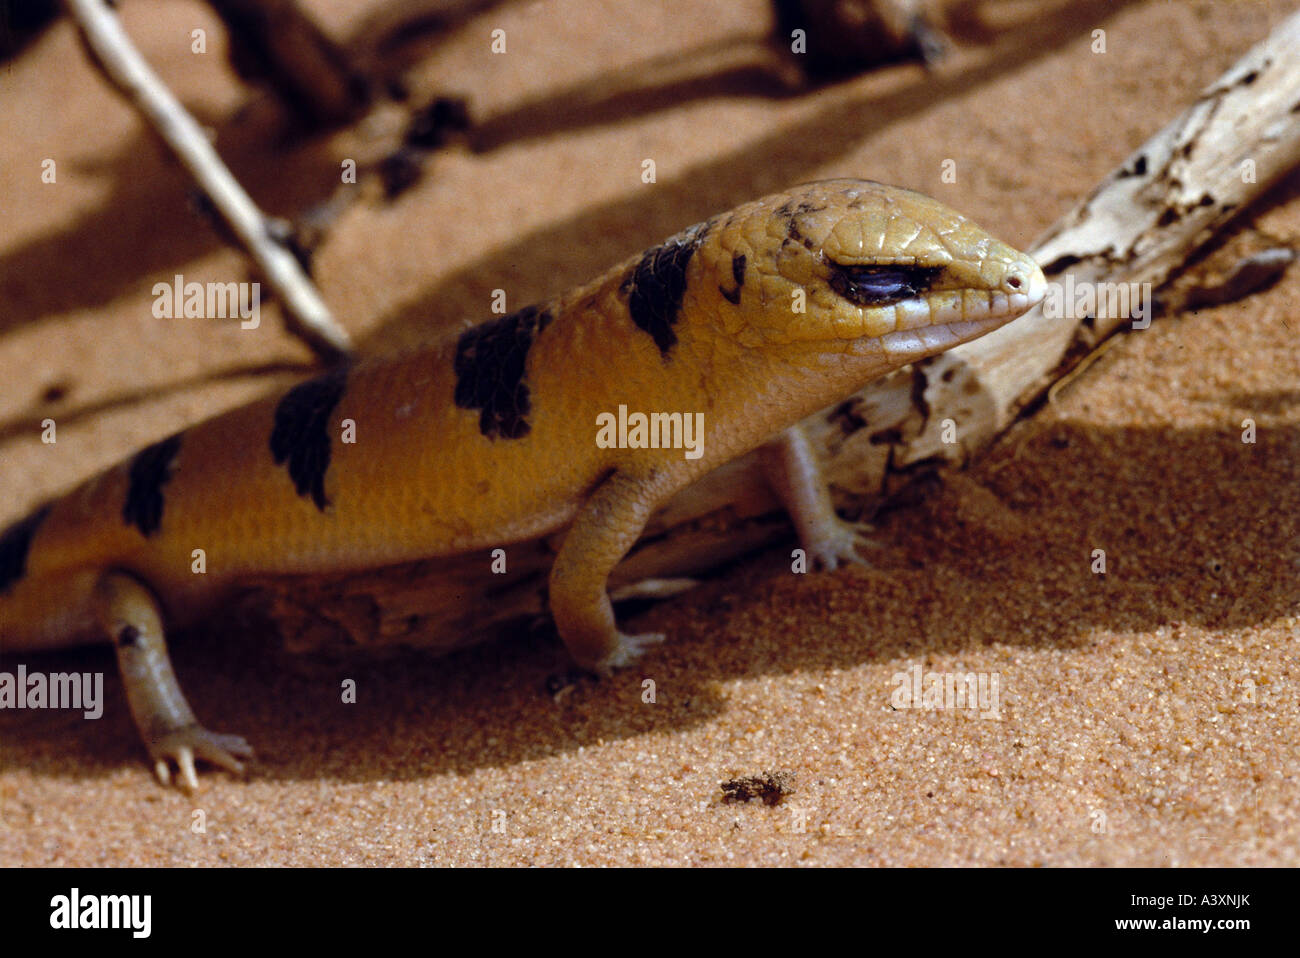 zoology / animals, reptiles, Skinks, Sandfish, (Scincus scincus), in the desert, in shadow, close-up, distribution: North Africa Stock Photo